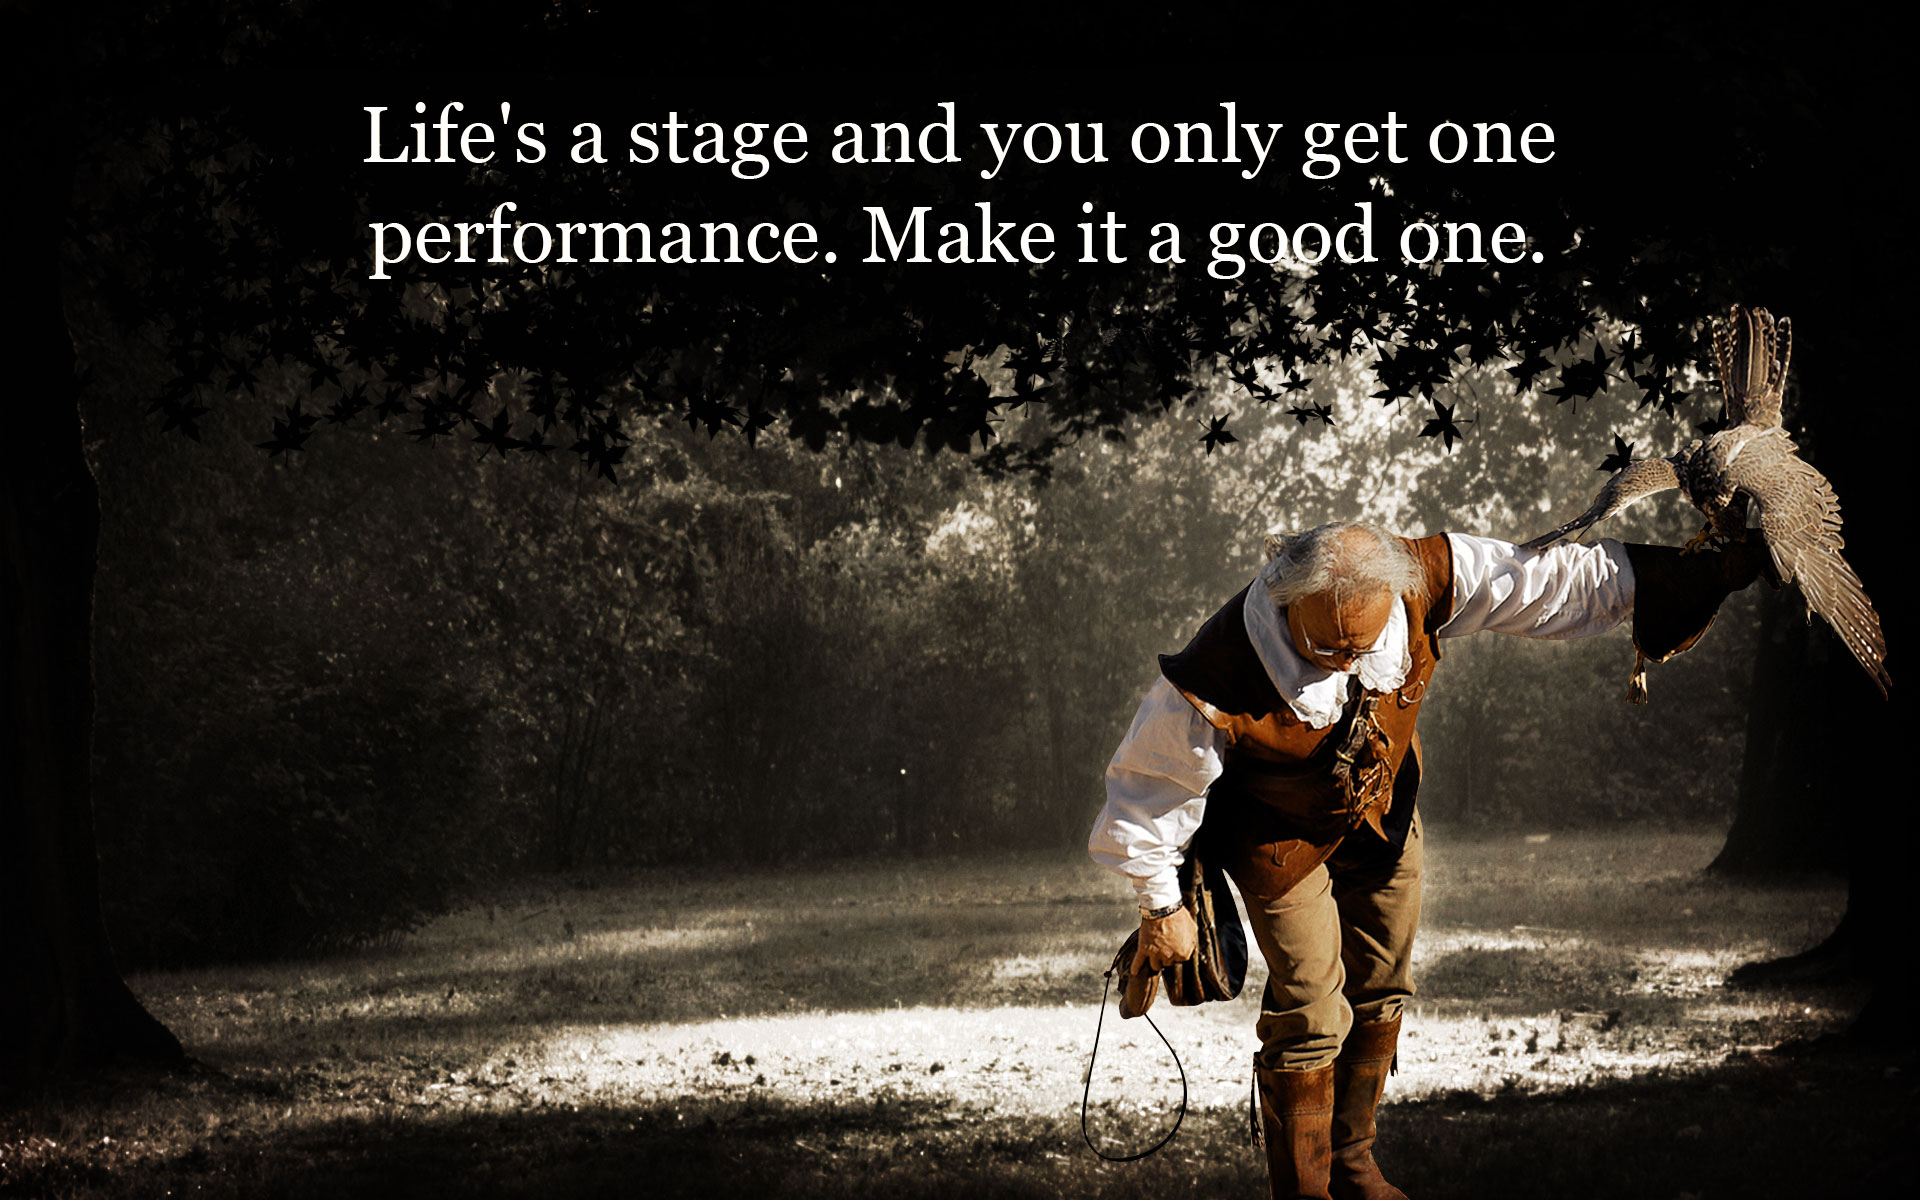 Life's a stage and you only get one performance. Make it a good one